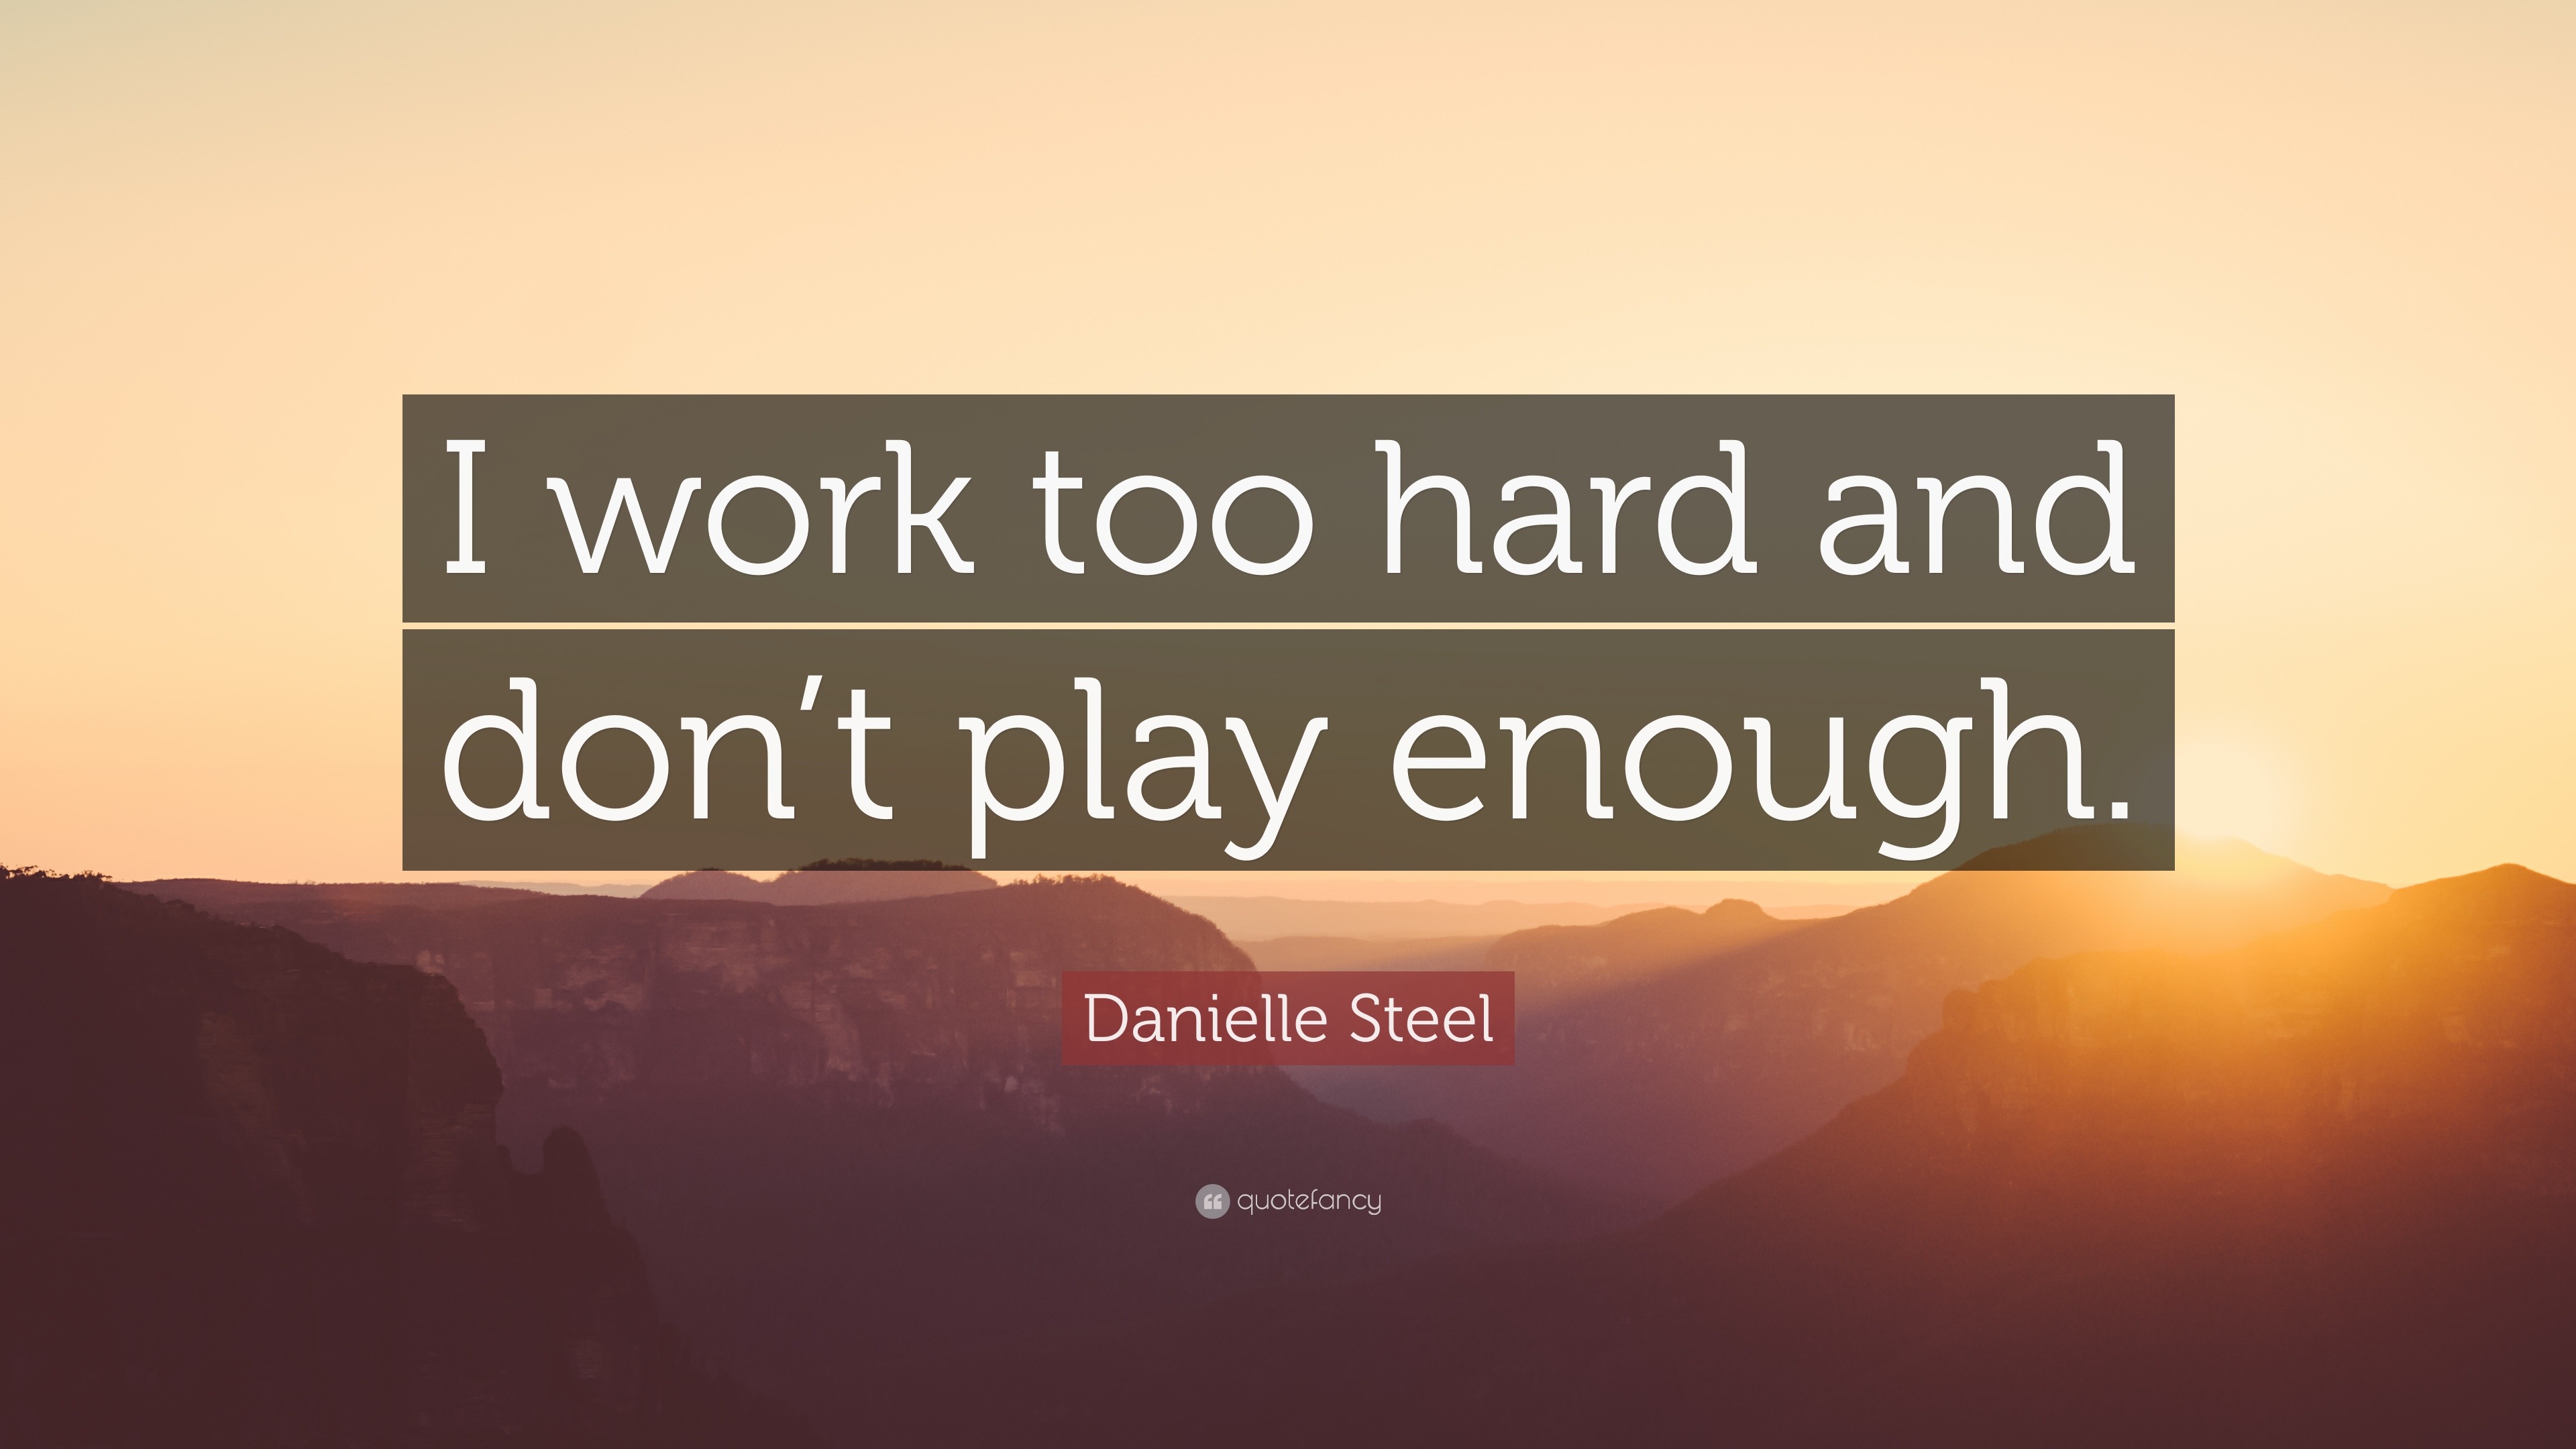 Danielle Steel Quote: “I Work Too Hard And Don't Play Enough.”